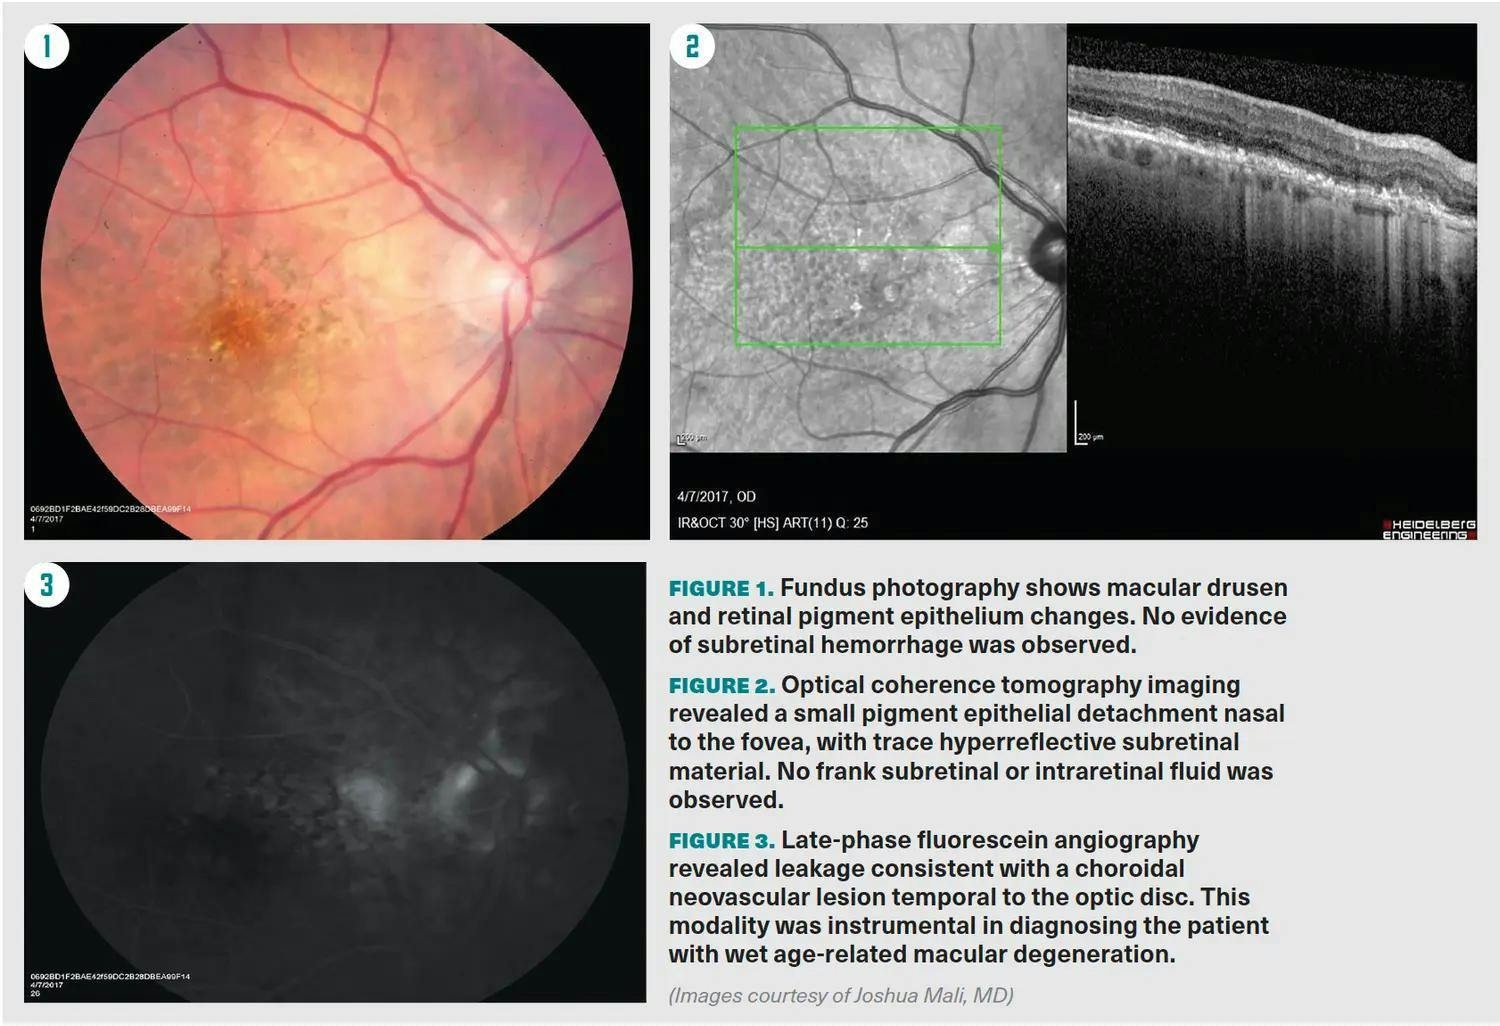 Figures 1: Fudus photography shows macular drusen and retinal pigment epithelium changes. No evidence of subretinal hemorrhage was observed. Figure 2: OCT imaging revealed a small pigment epithelial detachment nasal to the fovea, with trace hyperreflective subretinal material. No frank subretinal or intraretinal fluid was observed. Figure 3: Late-phase fluorescein angiography revealed leakage consistent with a choroidal neovascular lesion temporal to the optic disc. This modality was instrumental in diagnosing the patient with wet AMD.